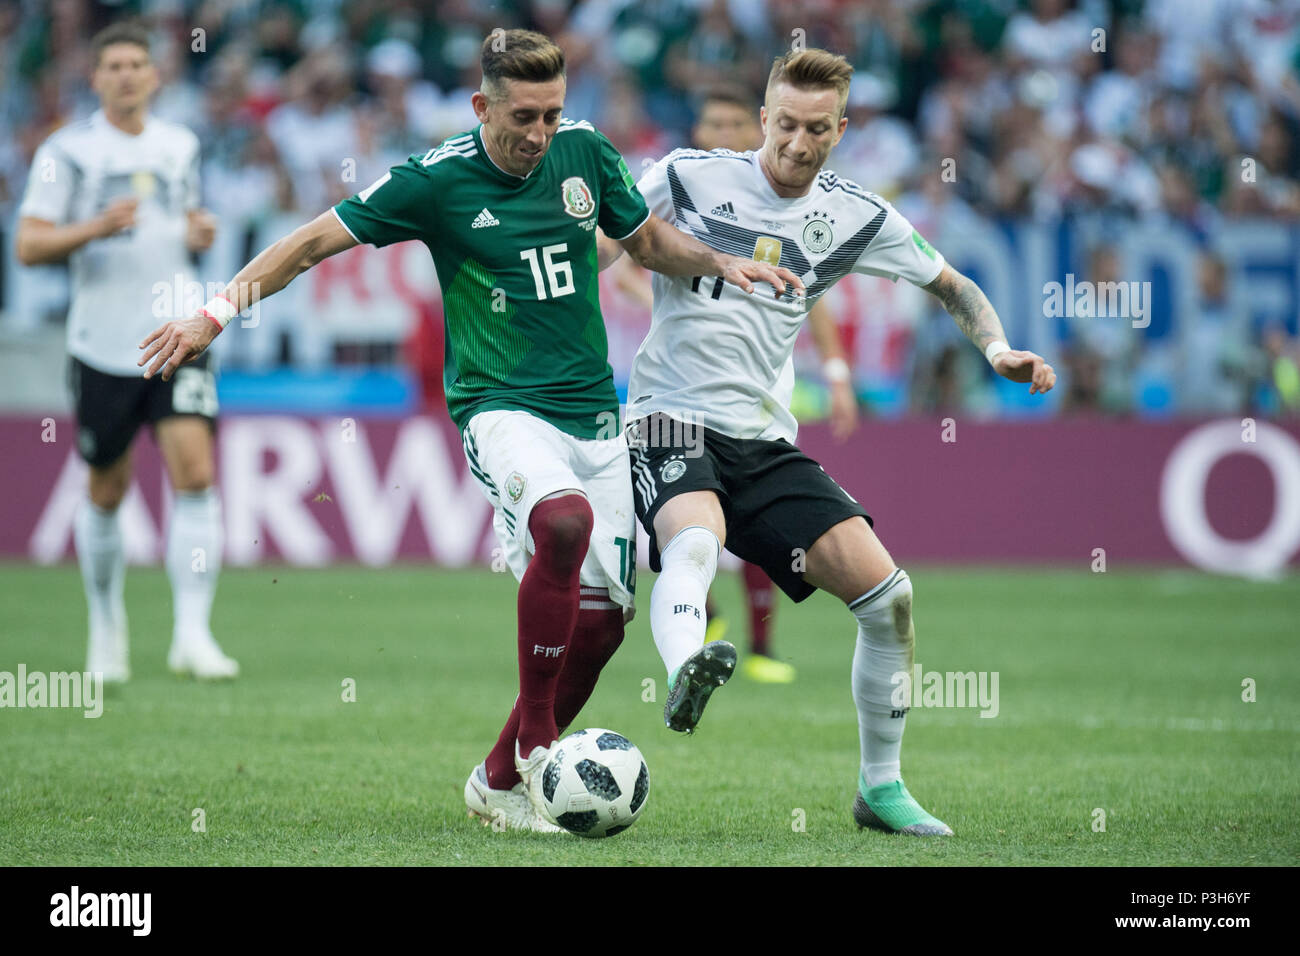 Hector HERRERA (left, MEX) versus Marco REUS (GER), Action, duels, Germany (GER) - Mexico (MEX) 0: 1, Preliminary Round, Group F, Match 11, on 17.06.2018 in Moscow; Football World Cup 2018 in Russia from 14.06. - 15.07.2018. | usage worldwide Stock Photo